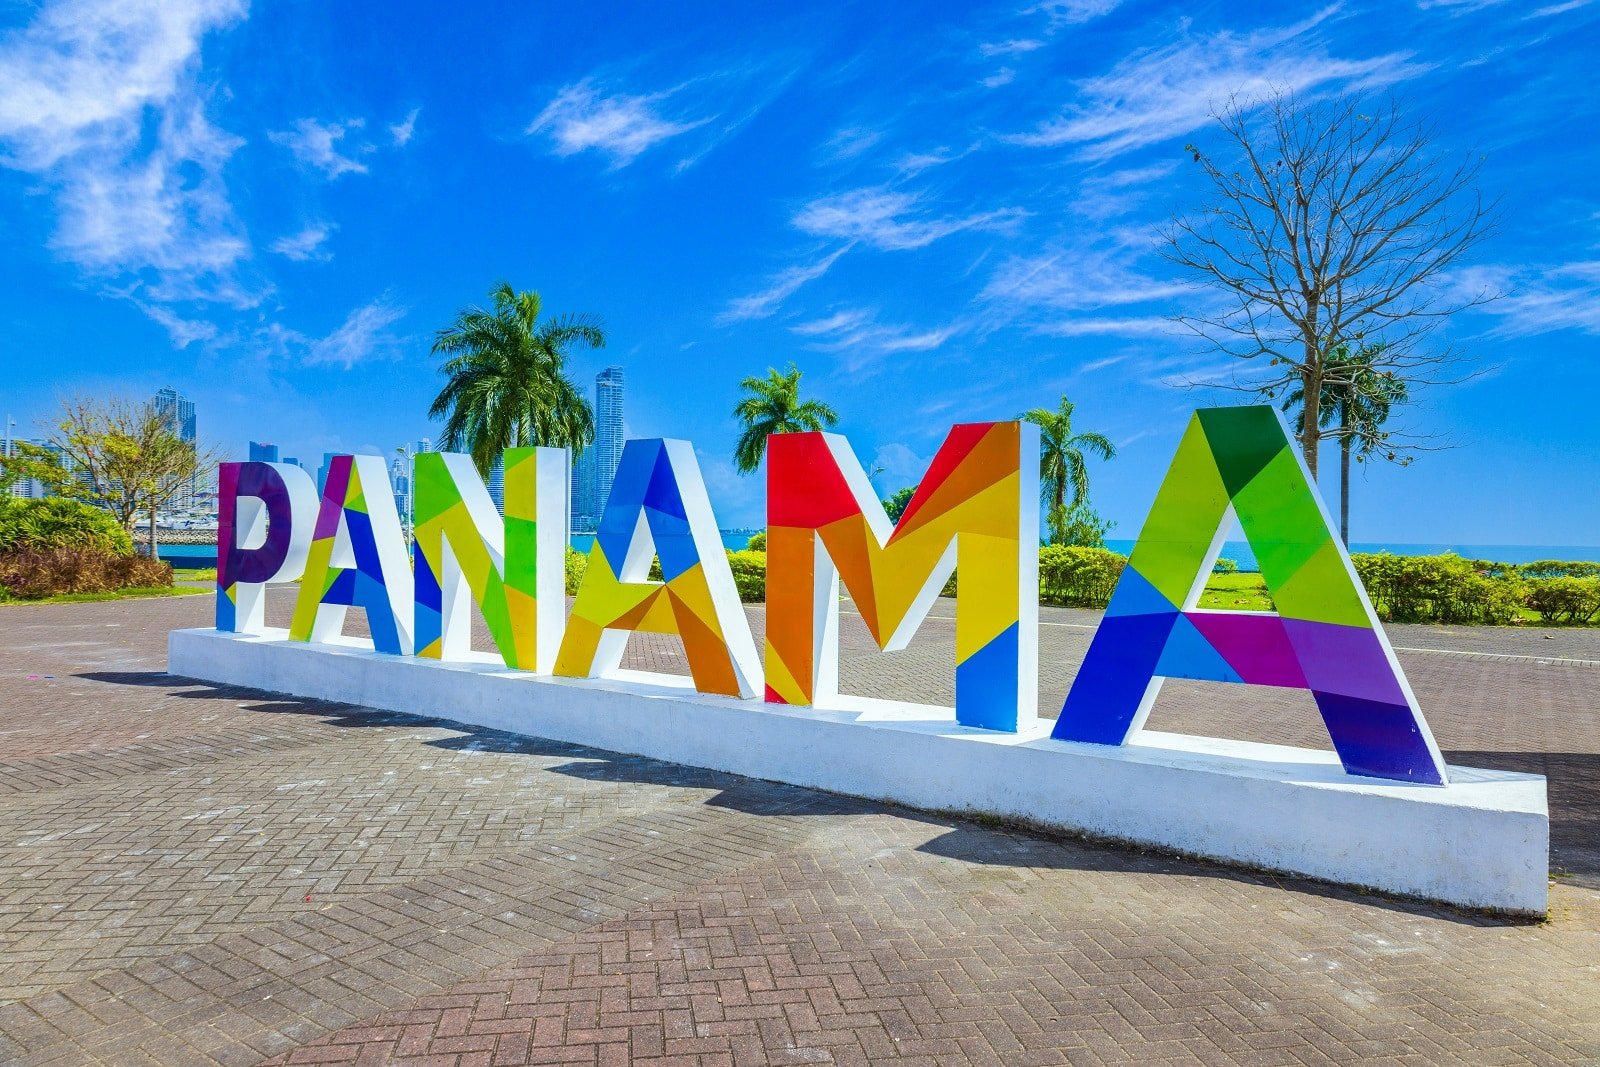 <p><span>Panama City, a cosmopolitan hub in Central America, offers a blend of modernity and history. The city’s skyline is a testament to its economic growth, while areas like Casco Viejo showcase its colonial past.</span></p> <p><span>The Panama Canal, a short drive from the city, is a must-visit for its historical significance and engineering feat. Panama City is a destination that combines urban experiences with historical exploration.</span></p> <p><b>Insider’s Tip: </b><span>Visit the Panama Canal’s Miraflores Locks for an insight into this engineering marvel. </span></p> <p><b>When to Travel: </b><span>Mid-December to April for dry weather. </span></p> <p><b>How to Get There: </b><span>Fly directly to Panama City.</span></p>